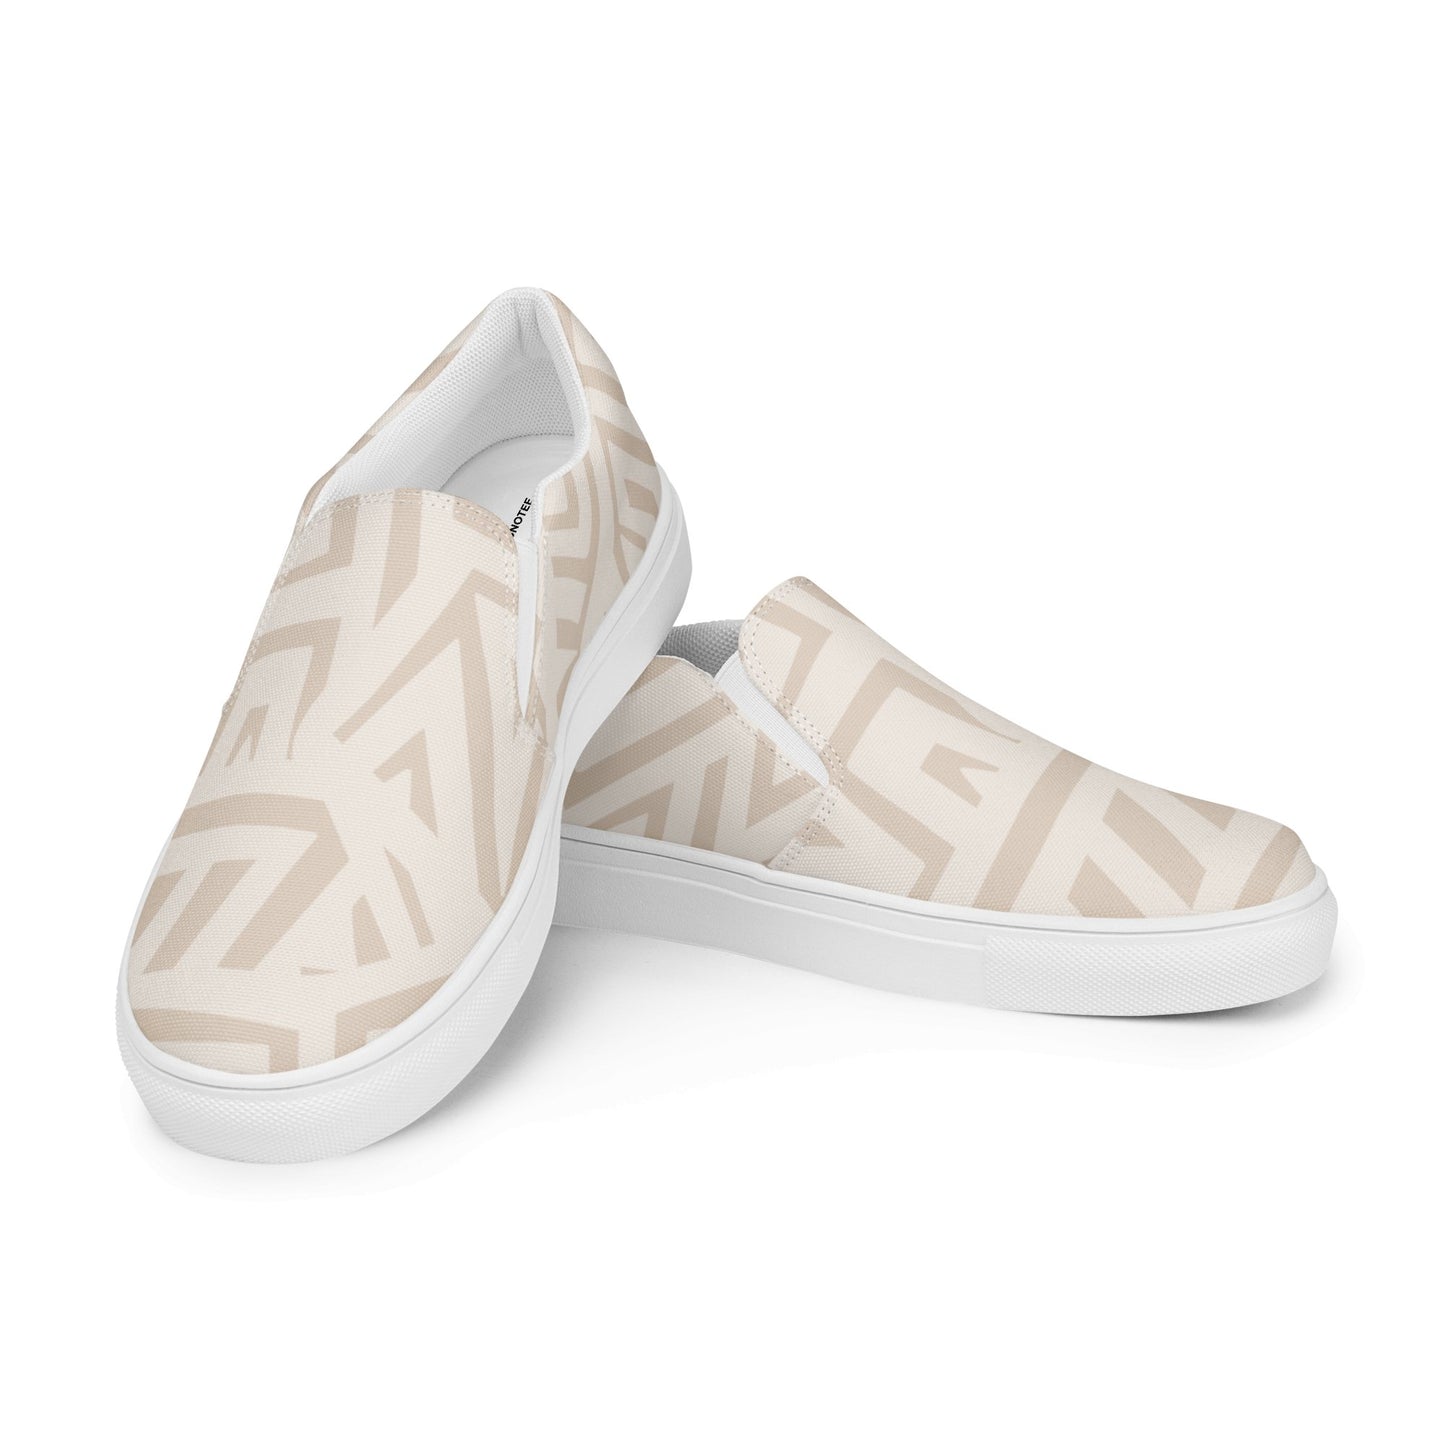 womens-slip-on-canvas-shoes-ethnic-style-pink-white